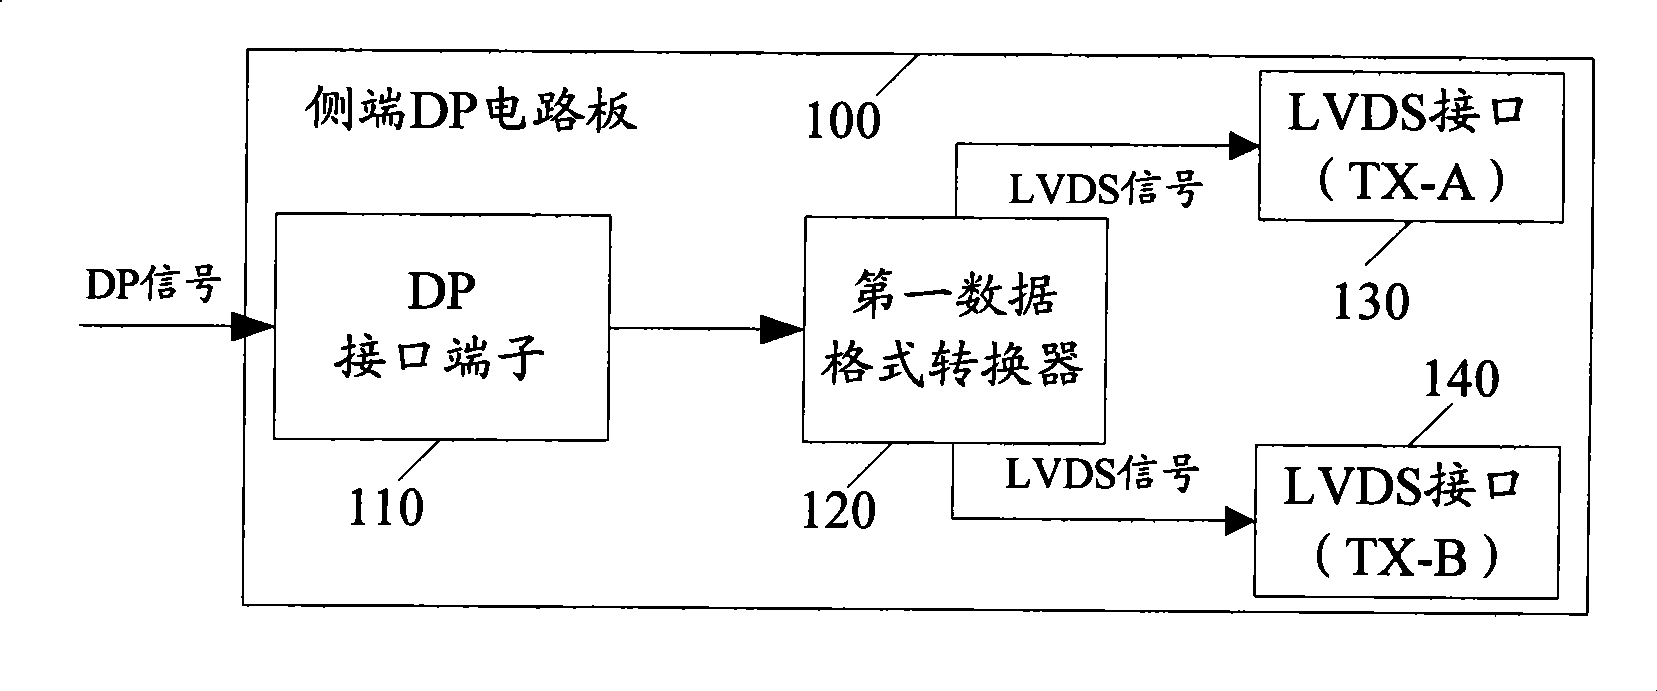 Implementing method for function of DP interface and television set